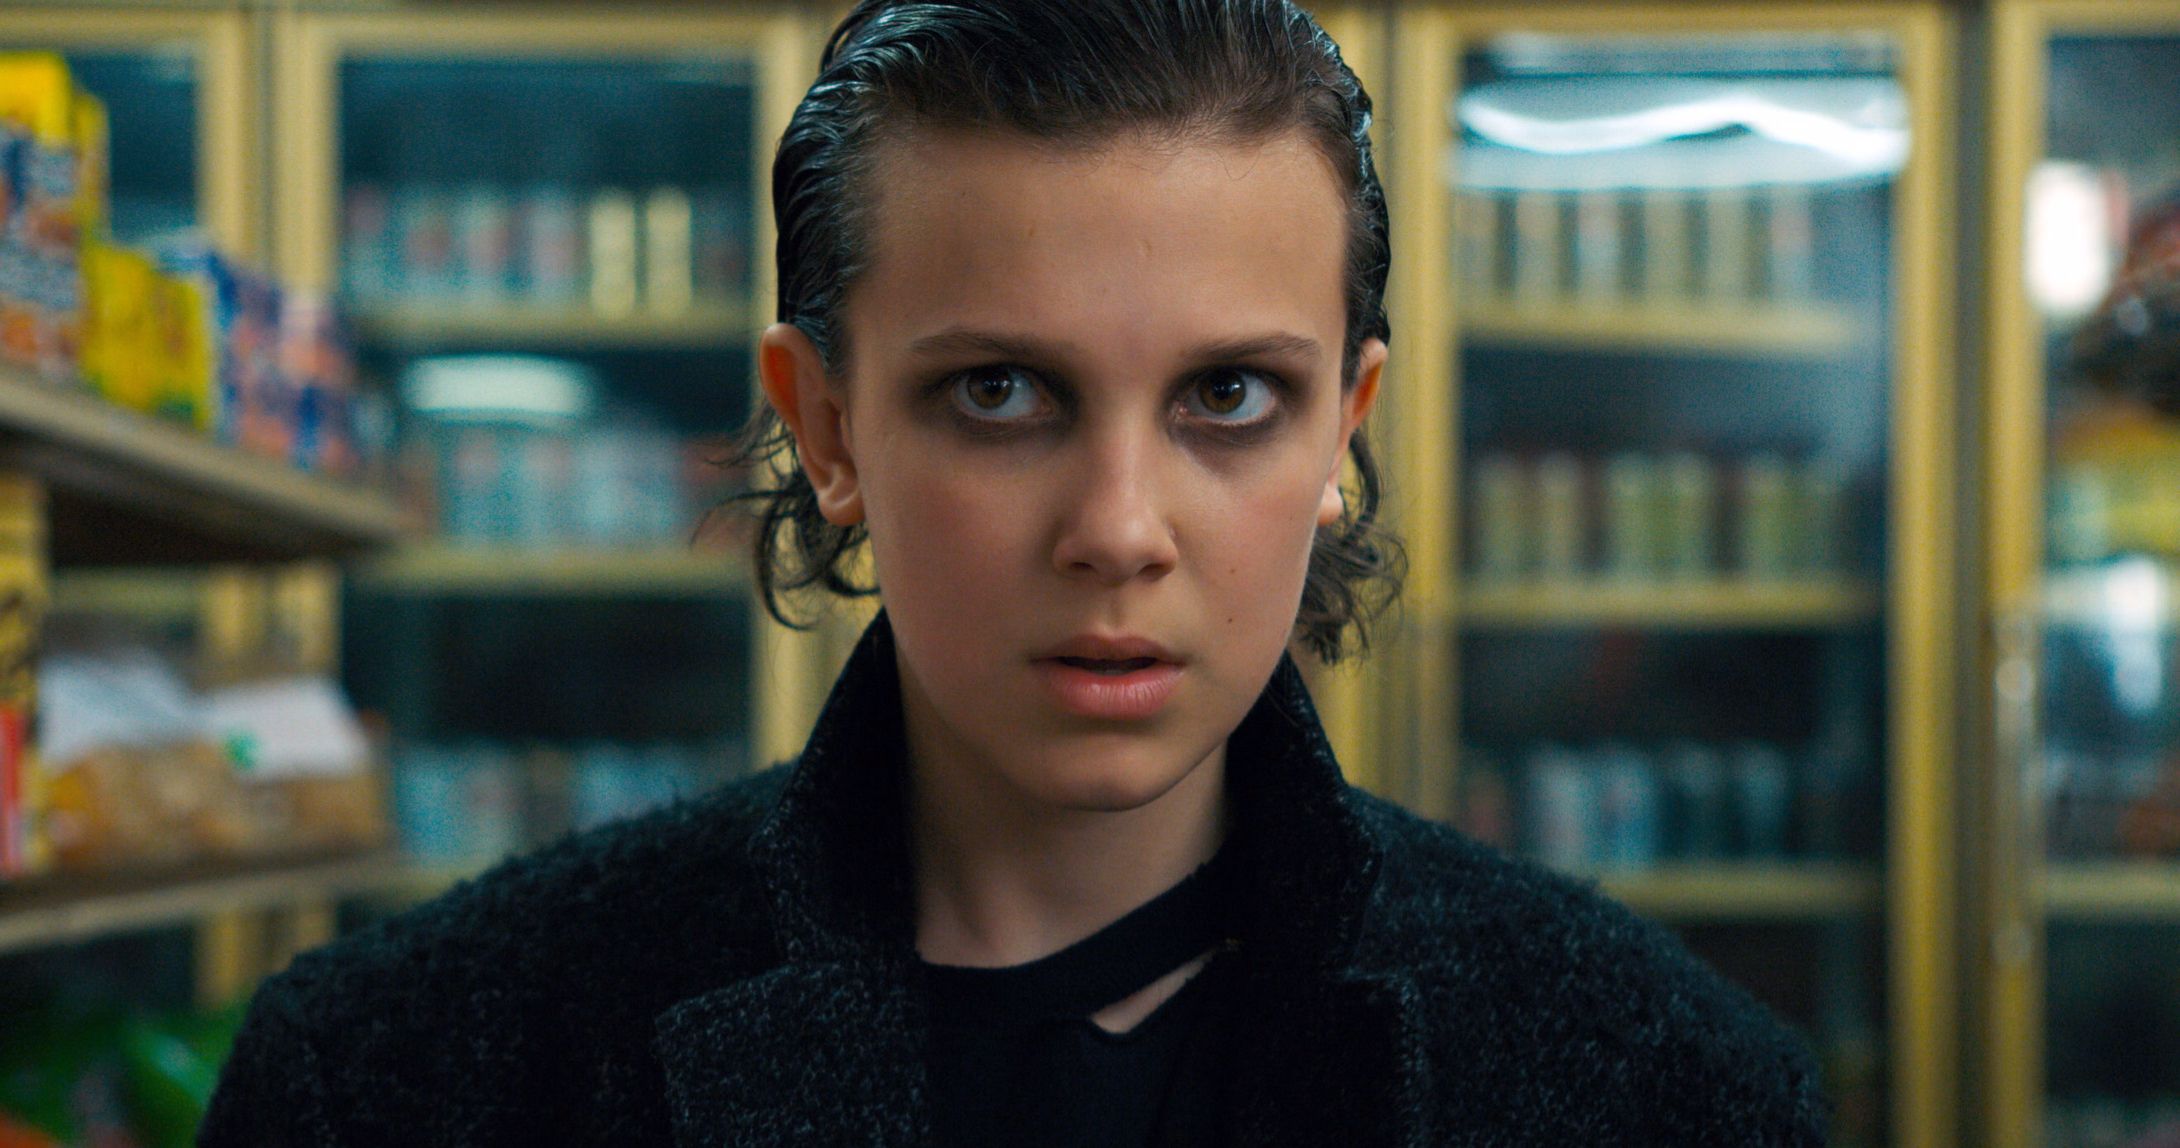 Millie Bobby Brown Almost Quit Acting After Failed Game of Thrones Audition